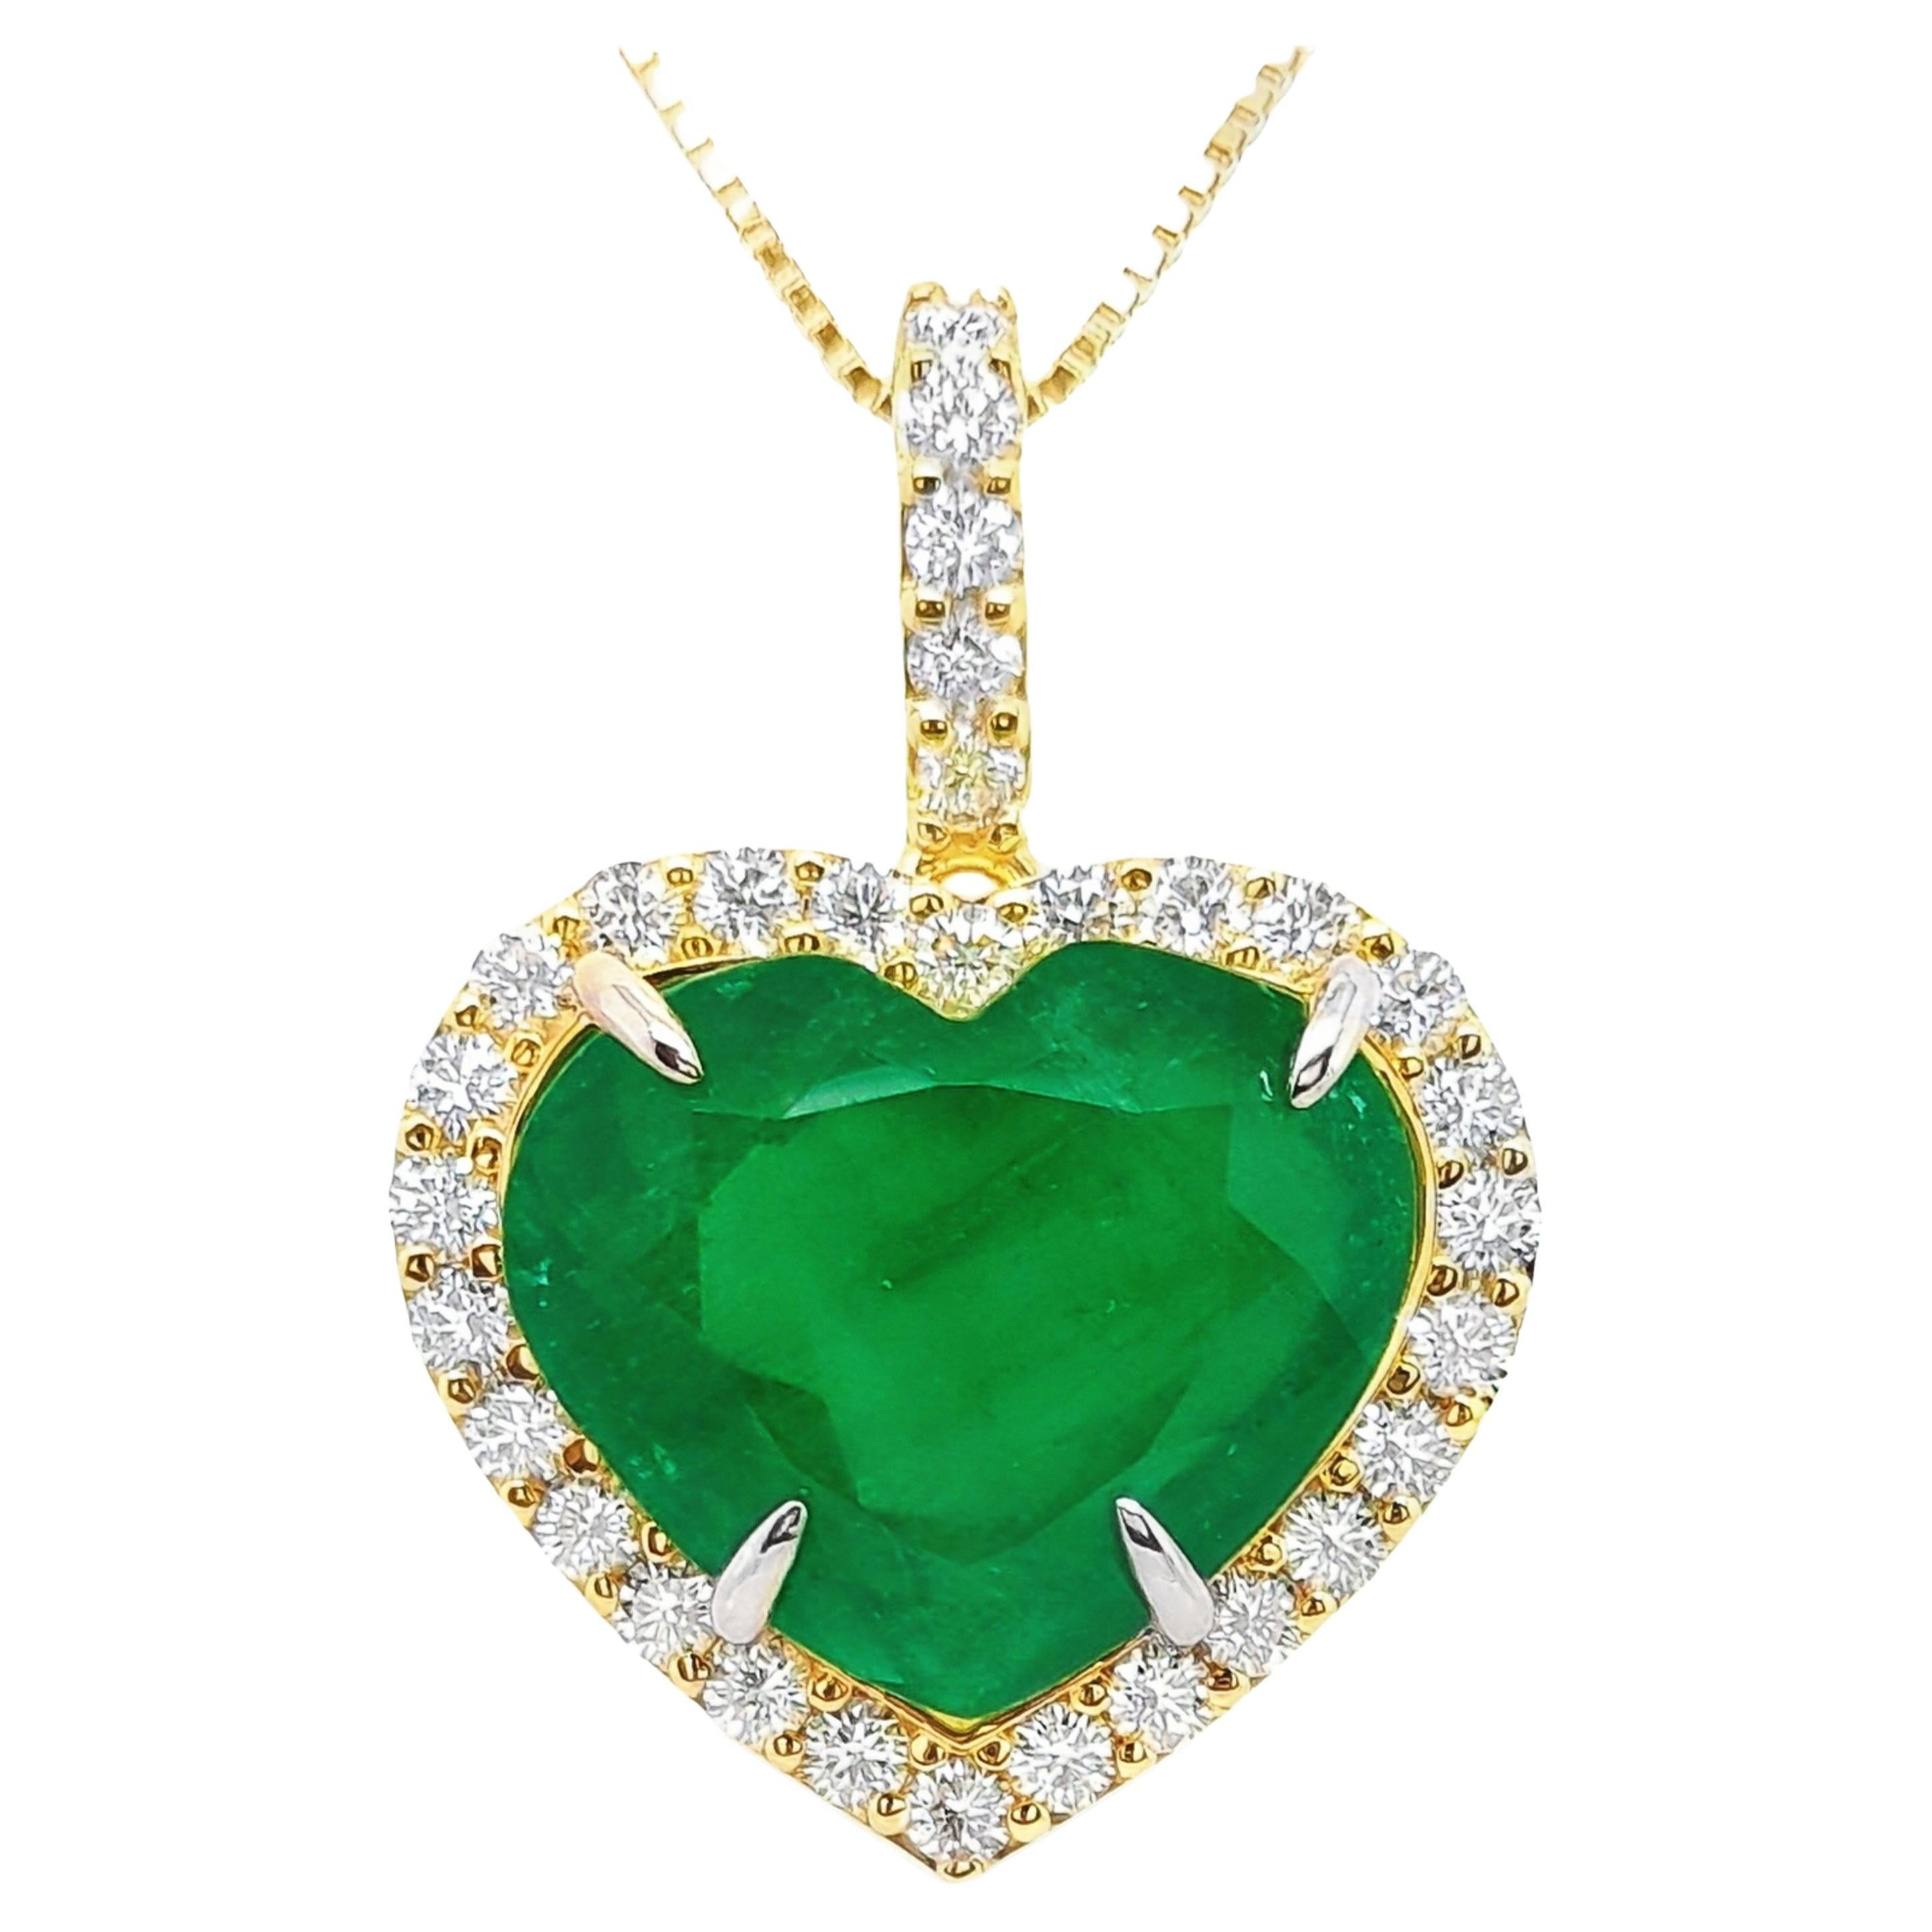 IGI Certified 21.20ct Colombia Emerald 1.60ct Diamonds 18K Yellow Gold Necklace